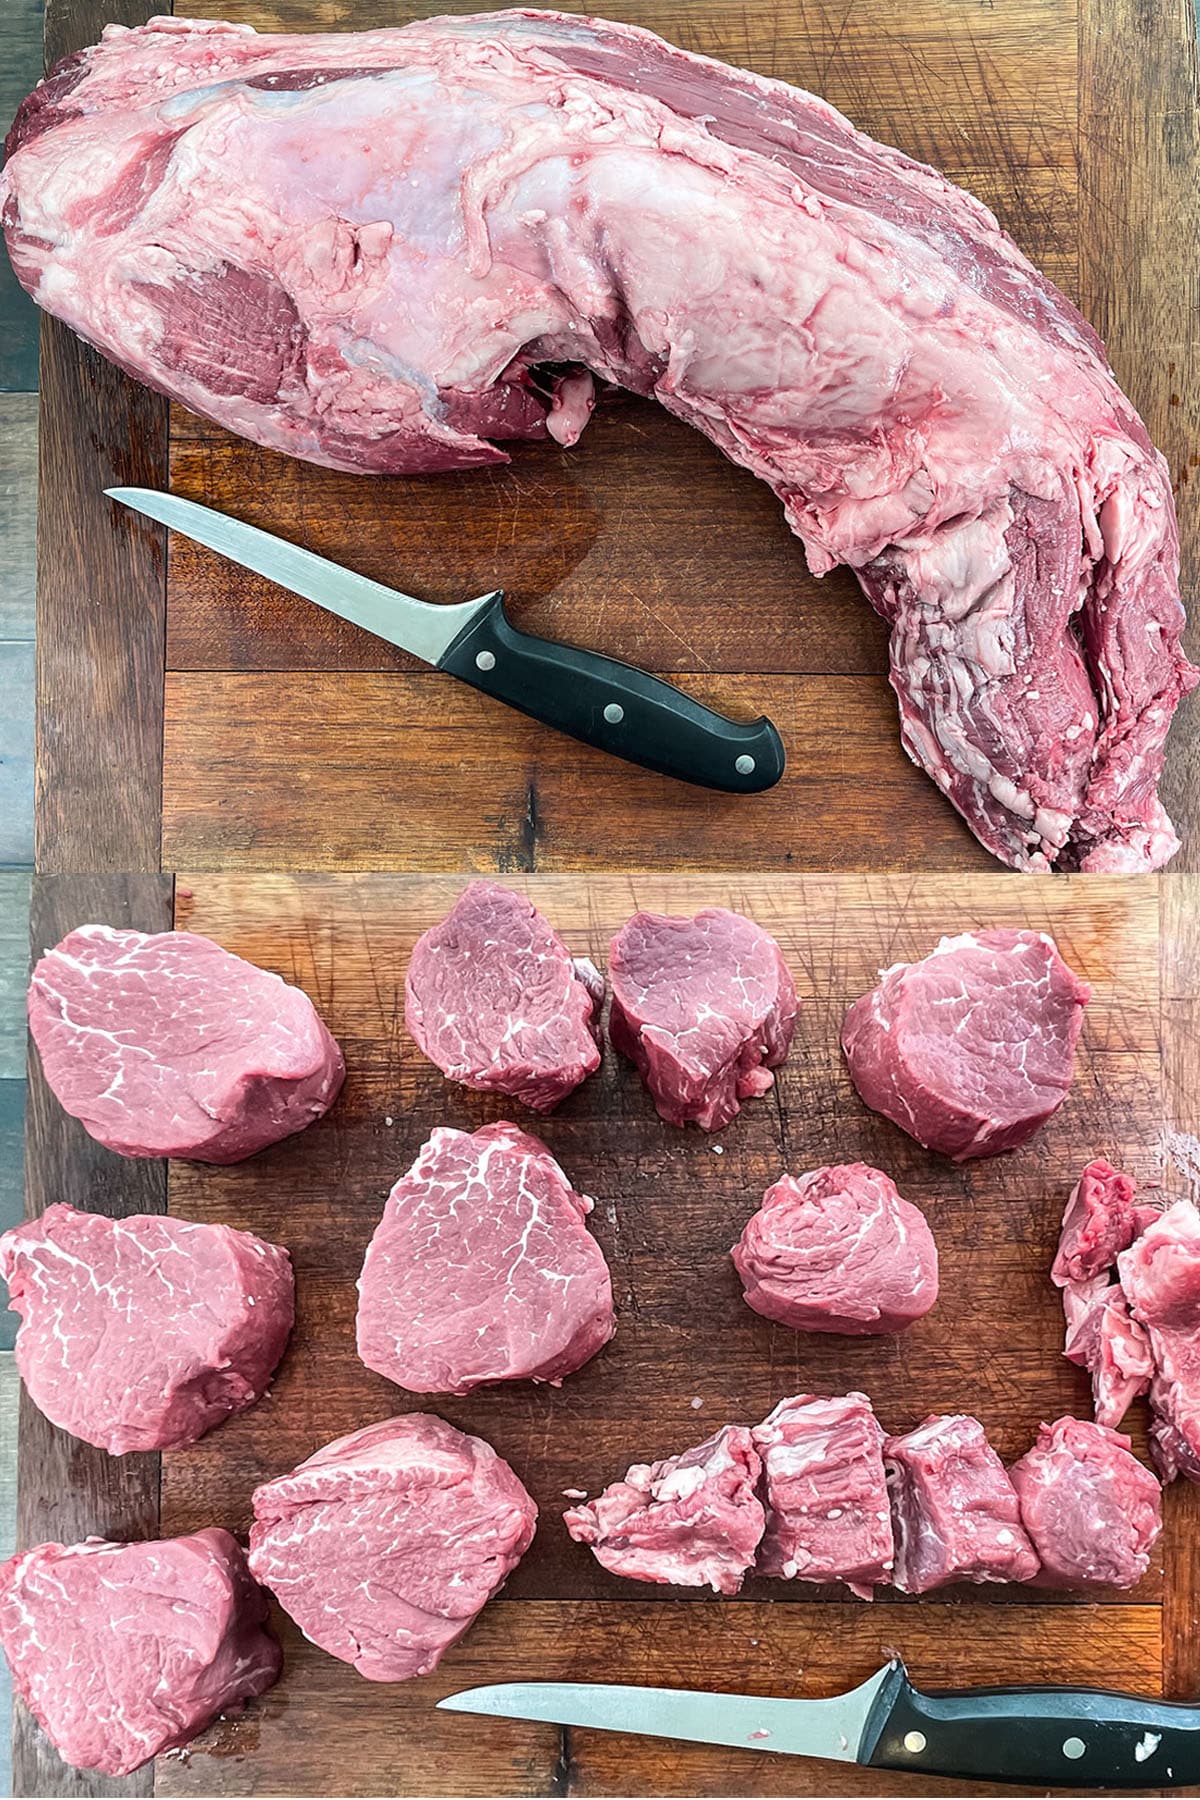 Save Money By Cutting Your Own Filet Mignon Steaks